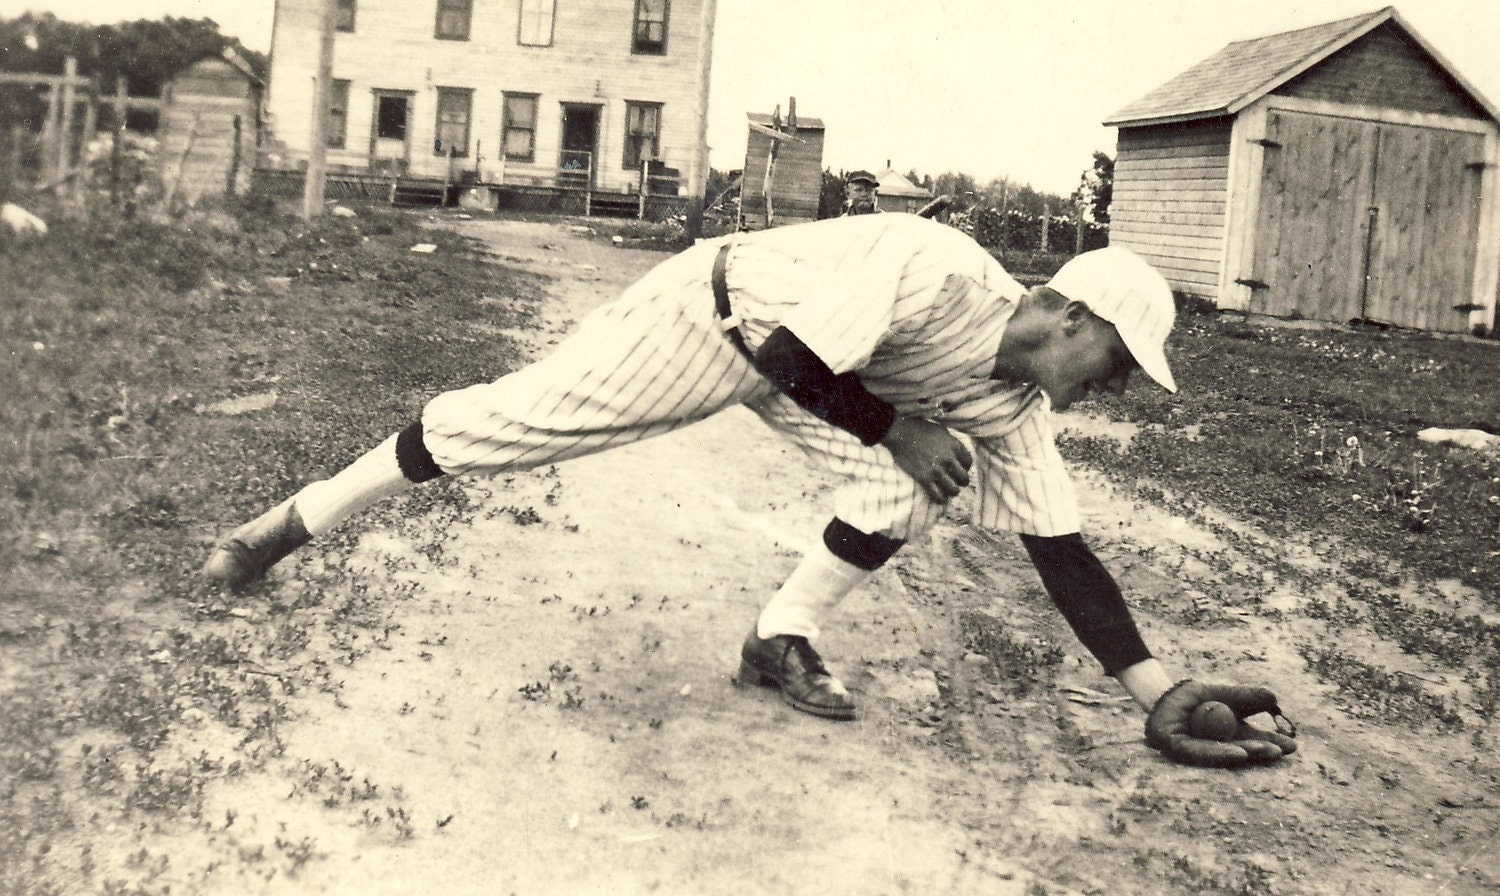 Young Man in BASEBALL FIELDING POSE Stretching For a Ground Ball Photo Circa 2930s - NiepceGallery